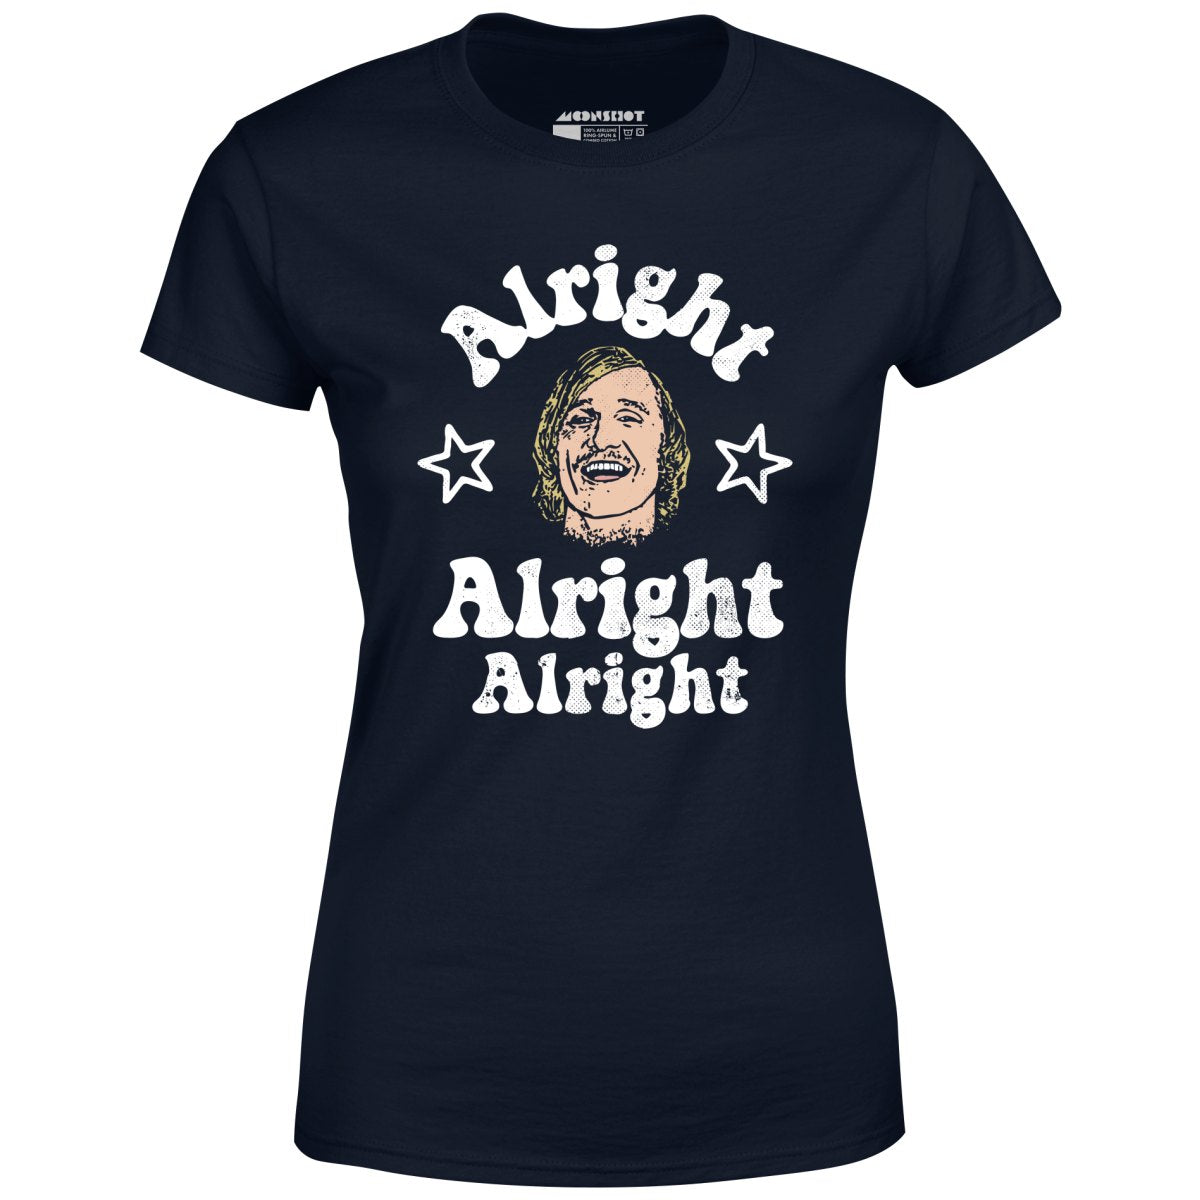 Alright Alright Alright Wooderson - Women's T-Shirt